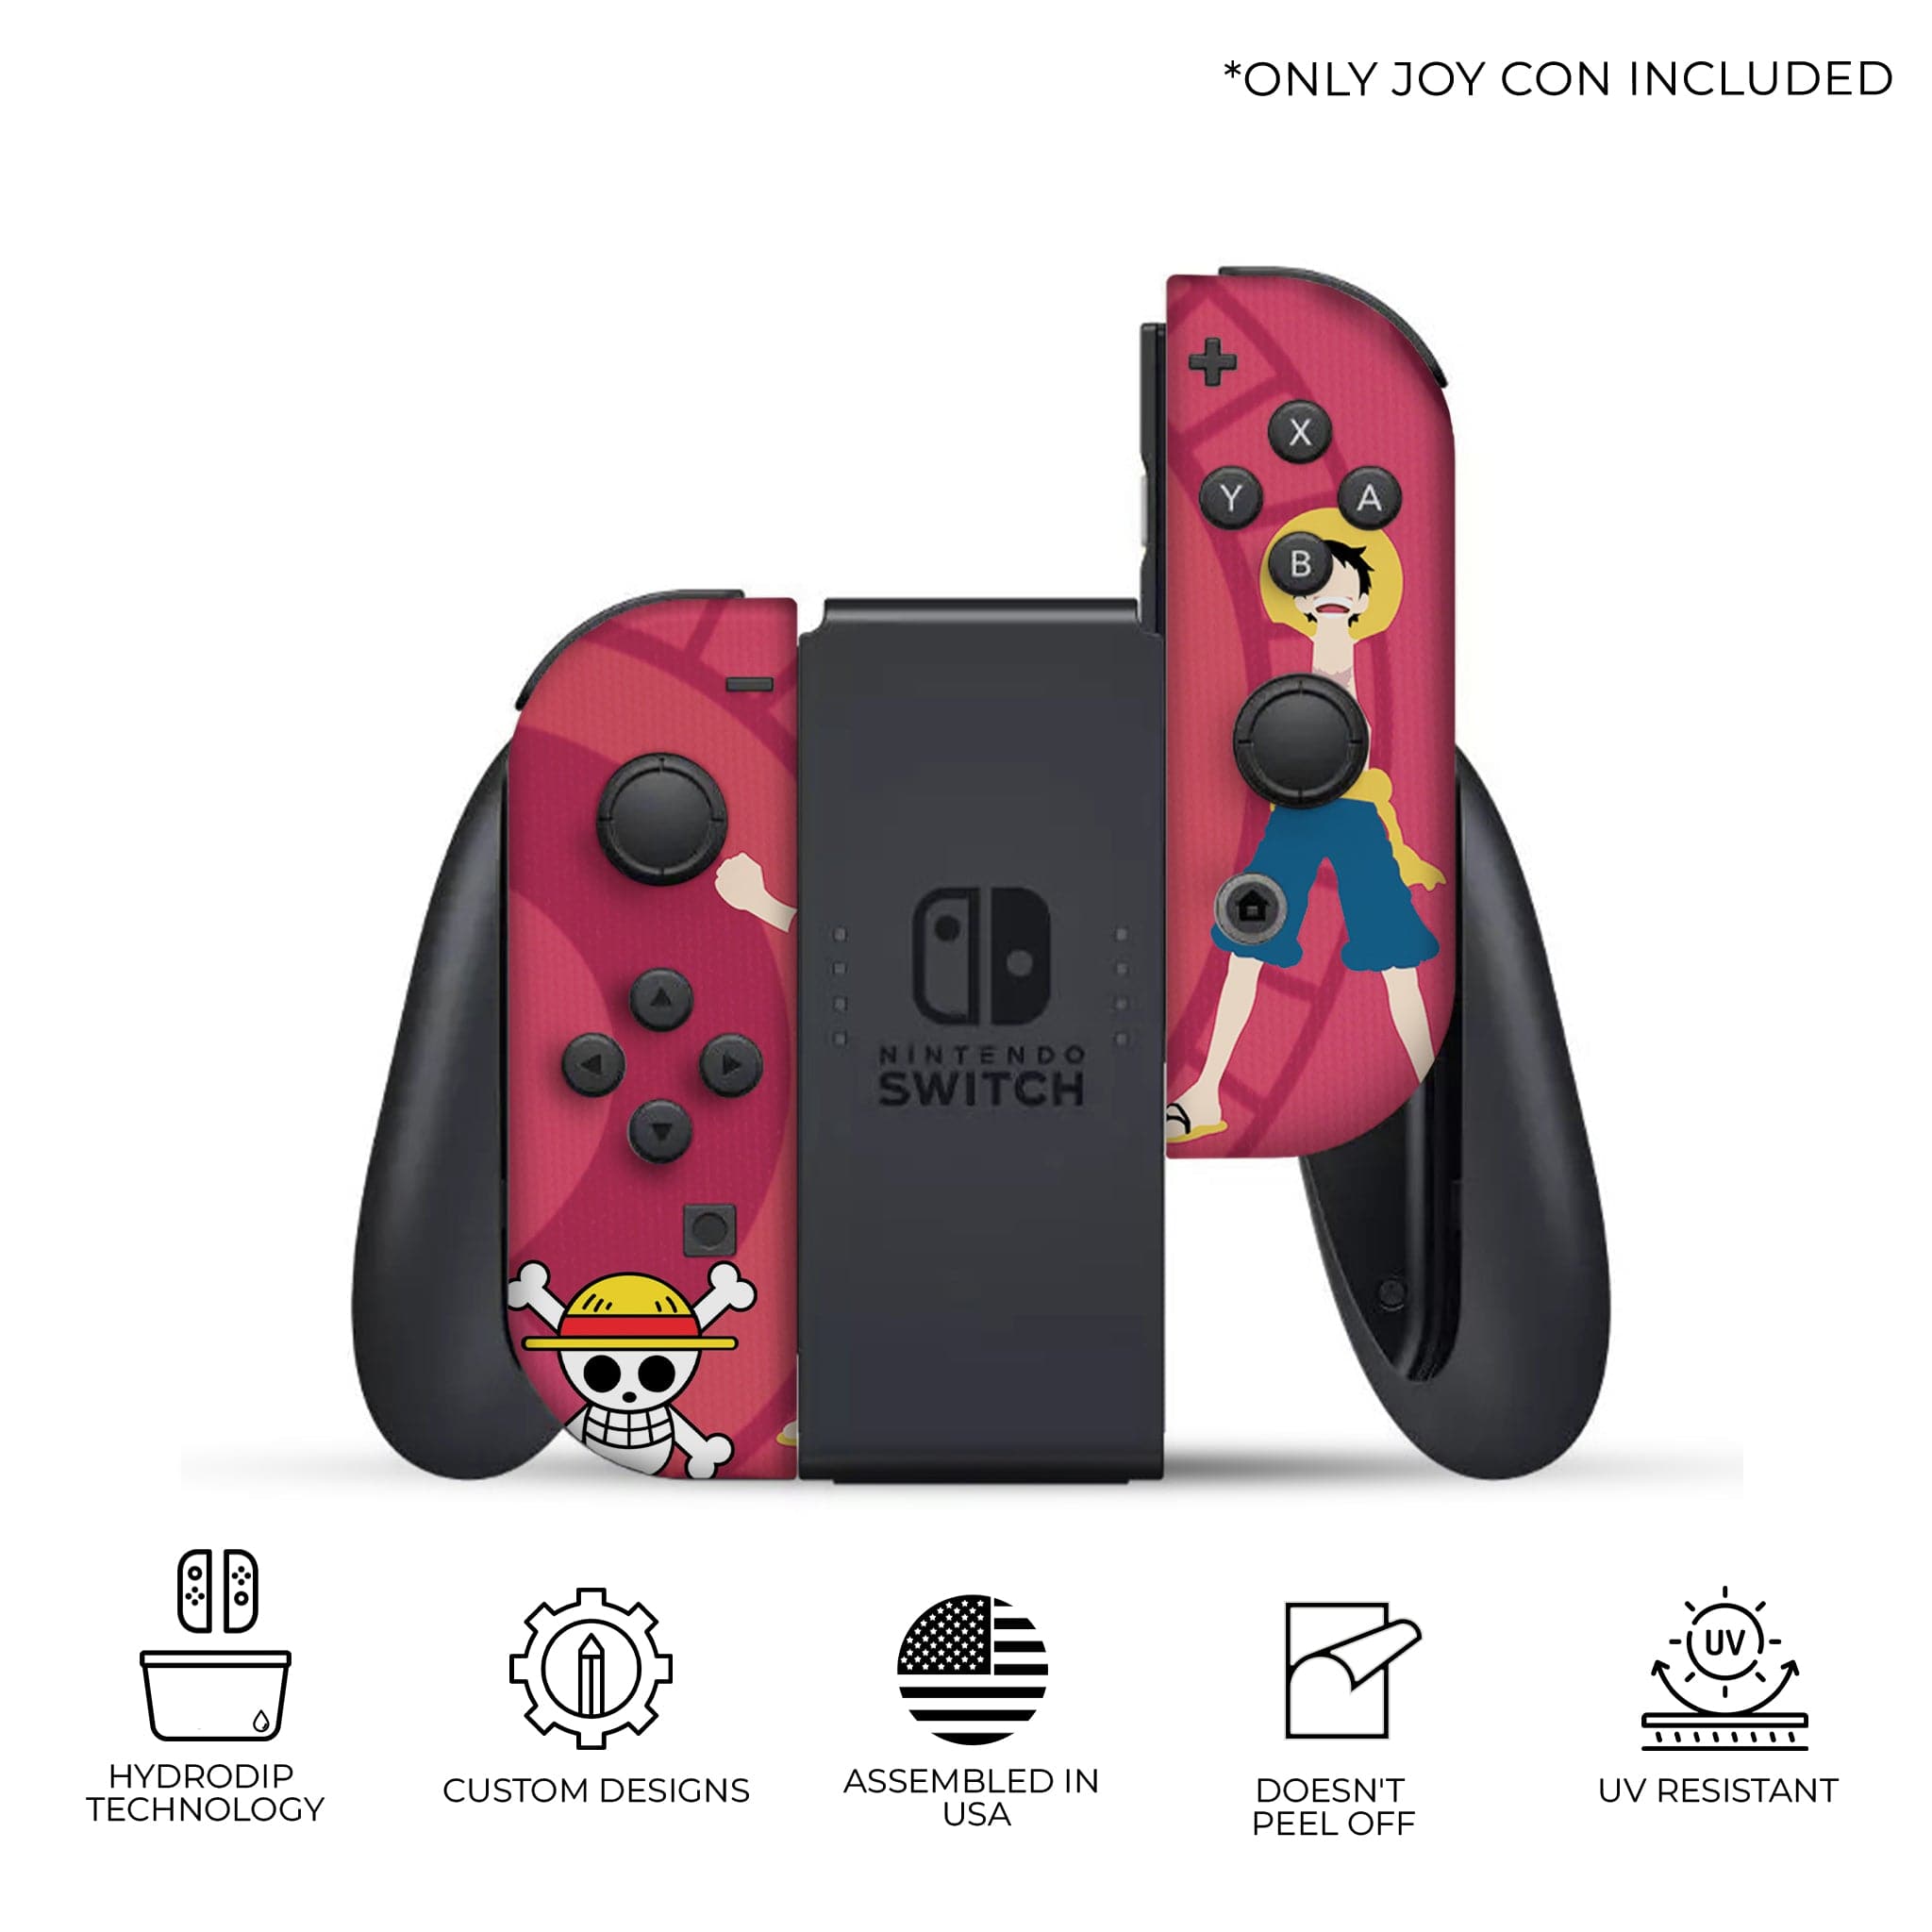 Luffy One Piece Inspired Nintendo Switch Joy-Con Left and Right Switch Controllers by Nintendo